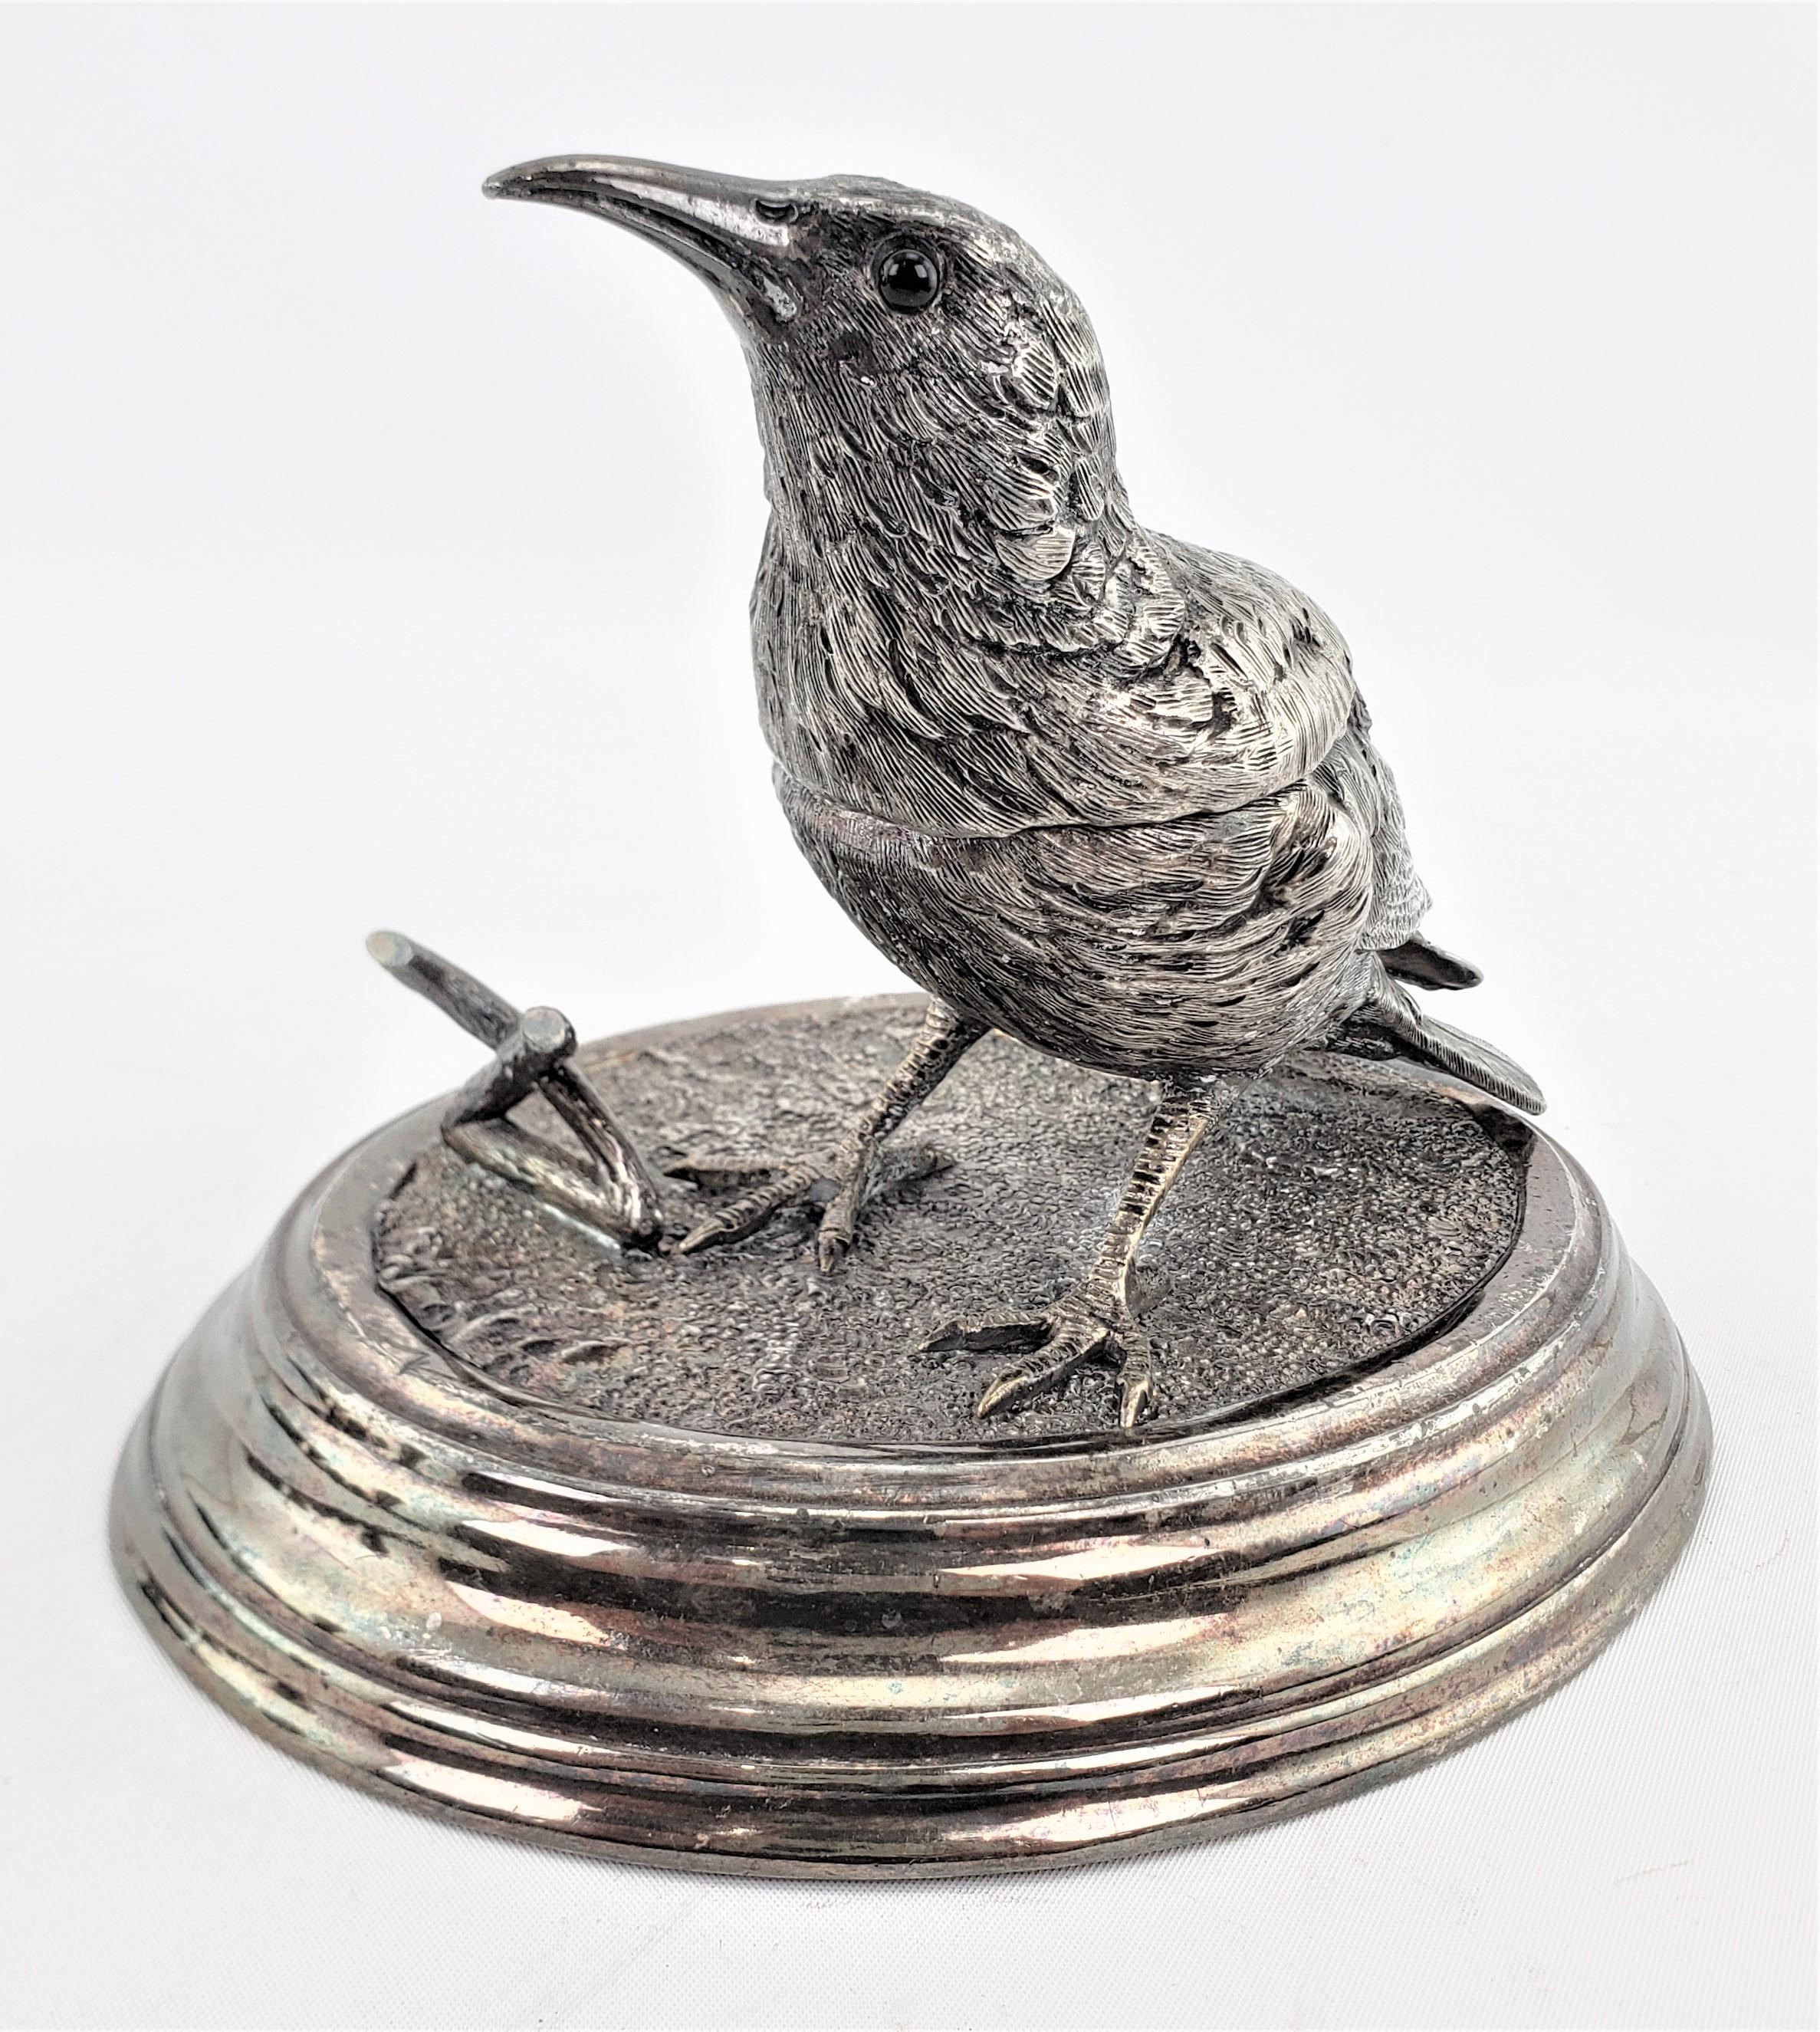 19th Century Antique Ornately Cast & Silver Plated Figural Bird Inkwell & Pen Holder or Rest